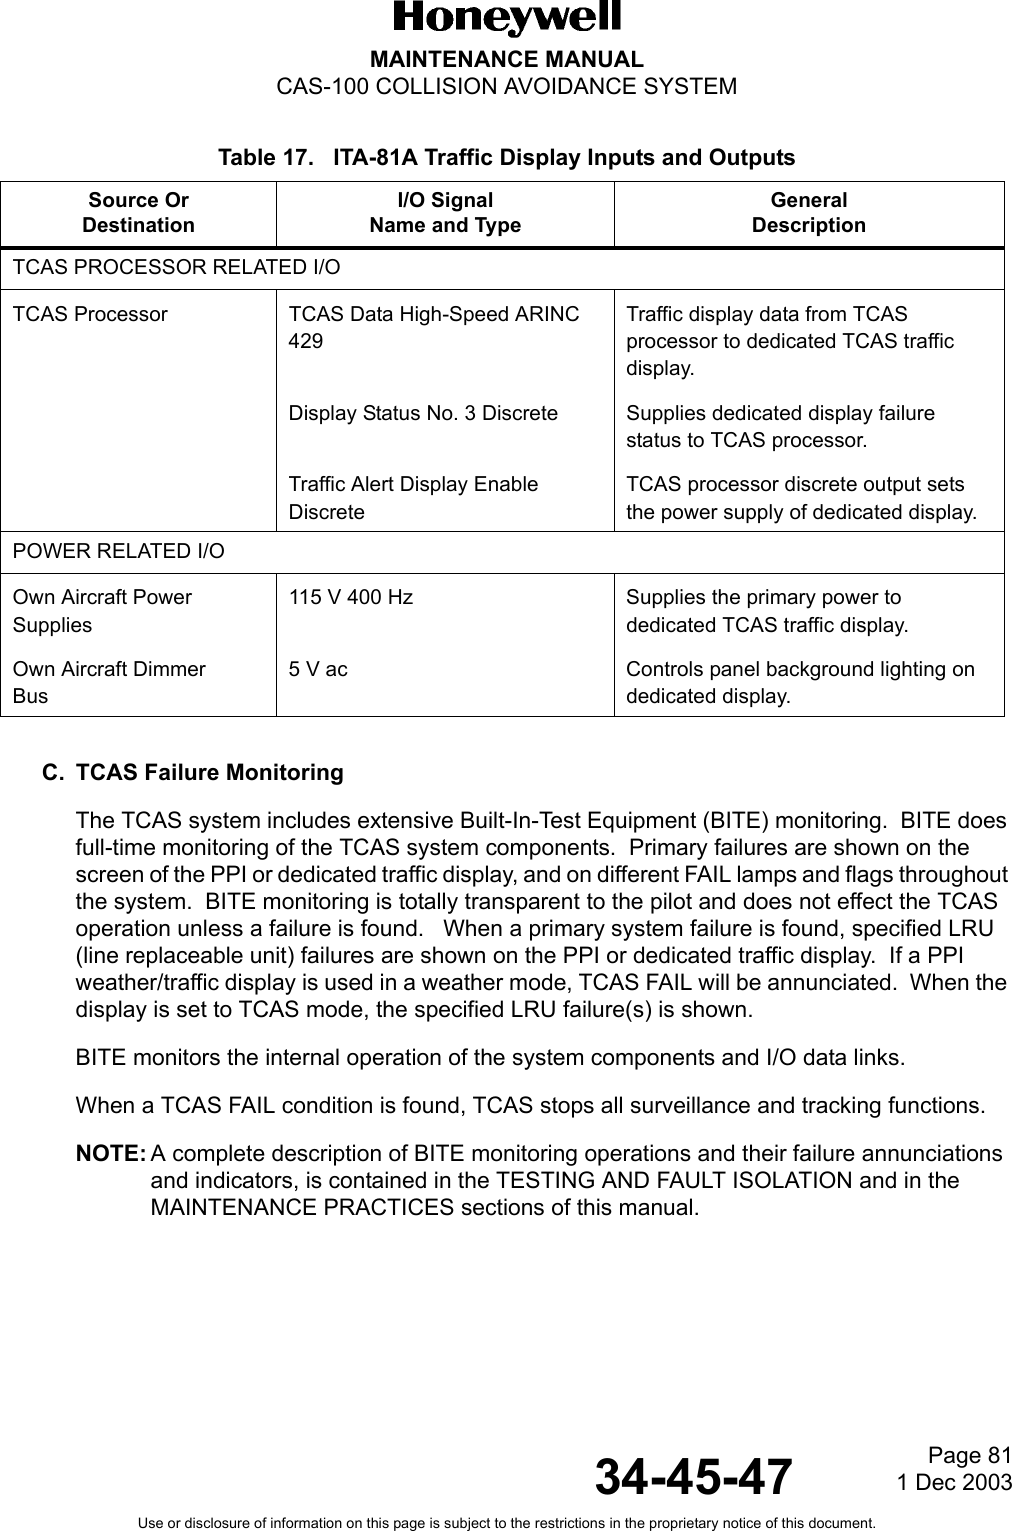 Page 811 Dec 200334-45-47MAINTENANCE MANUALCAS-100 COLLISION AVOIDANCE SYSTEMUse or disclosure of information on this page is subject to the restrictions in the proprietary notice of this document.Table 17.   ITA-81A Traffic Display Inputs and OutputsC. TCAS Failure MonitoringThe TCAS system includes extensive Built-In-Test Equipment (BITE) monitoring.  BITE does full-time monitoring of the TCAS system components.  Primary failures are shown on the screen of the PPI or dedicated traffic display, and on different FAIL lamps and flags throughout the system.  BITE monitoring is totally transparent to the pilot and does not effect the TCAS operation unless a failure is found.   When a primary system failure is found, specified LRU (line replaceable unit) failures are shown on the PPI or dedicated traffic display.  If a PPI weather/traffic display is used in a weather mode, TCAS FAIL will be annunciated.  When the display is set to TCAS mode, the specified LRU failure(s) is shown.BITE monitors the internal operation of the system components and I/O data links.When a TCAS FAIL condition is found, TCAS stops all surveillance and tracking functions.NOTE: A complete description of BITE monitoring operations and their failure annunciations and indicators, is contained in the TESTING AND FAULT ISOLATION and in the MAINTENANCE PRACTICES sections of this manual.Source OrDestinationI/O SignalName and TypeGeneralDescriptionTCAS PROCESSOR RELATED I/OTCAS Processor TCAS Data High-Speed ARINC 429 Traffic display data from TCAS processor to dedicated TCAS traffic display. Display Status No. 3 Discrete Supplies dedicated display failure status to TCAS processor. Traffic Alert Display Enable Discrete TCAS processor discrete output sets the power supply of dedicated display.POWER RELATED I/OOwn Aircraft PowerSupplies115 V 400 Hz Supplies the primary power to dedicated TCAS traffic display. Own Aircraft DimmerBus 5 V ac Controls panel background lighting on dedicated display.